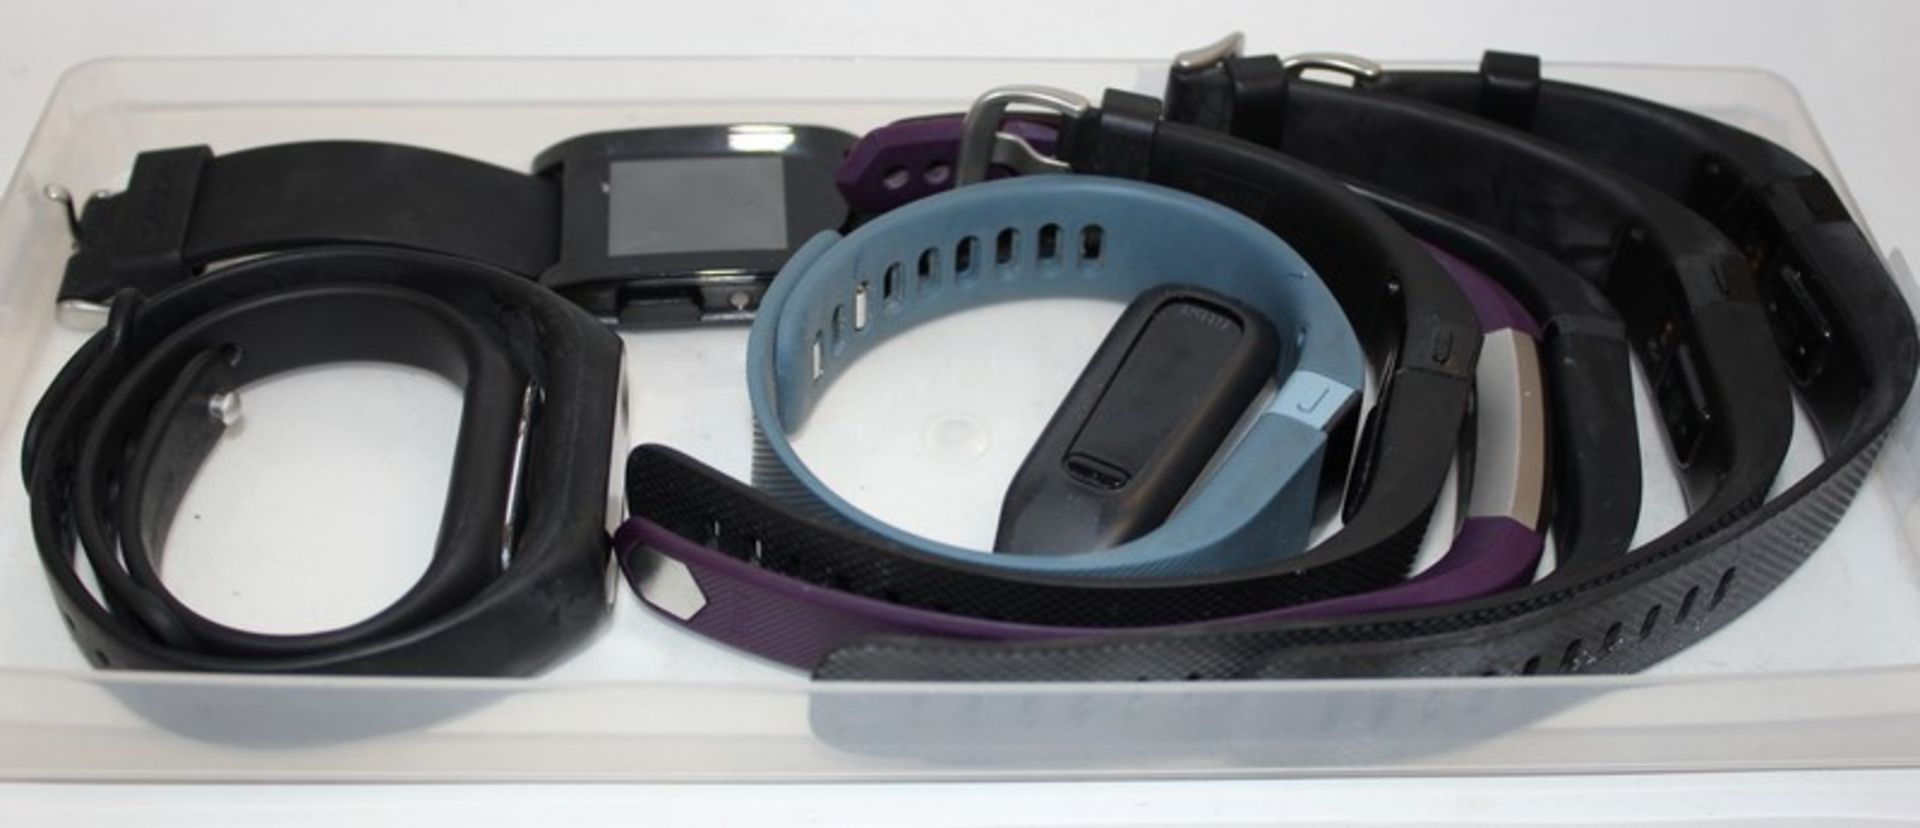 Seven Fitbit activity trackers and three other activity trackers.